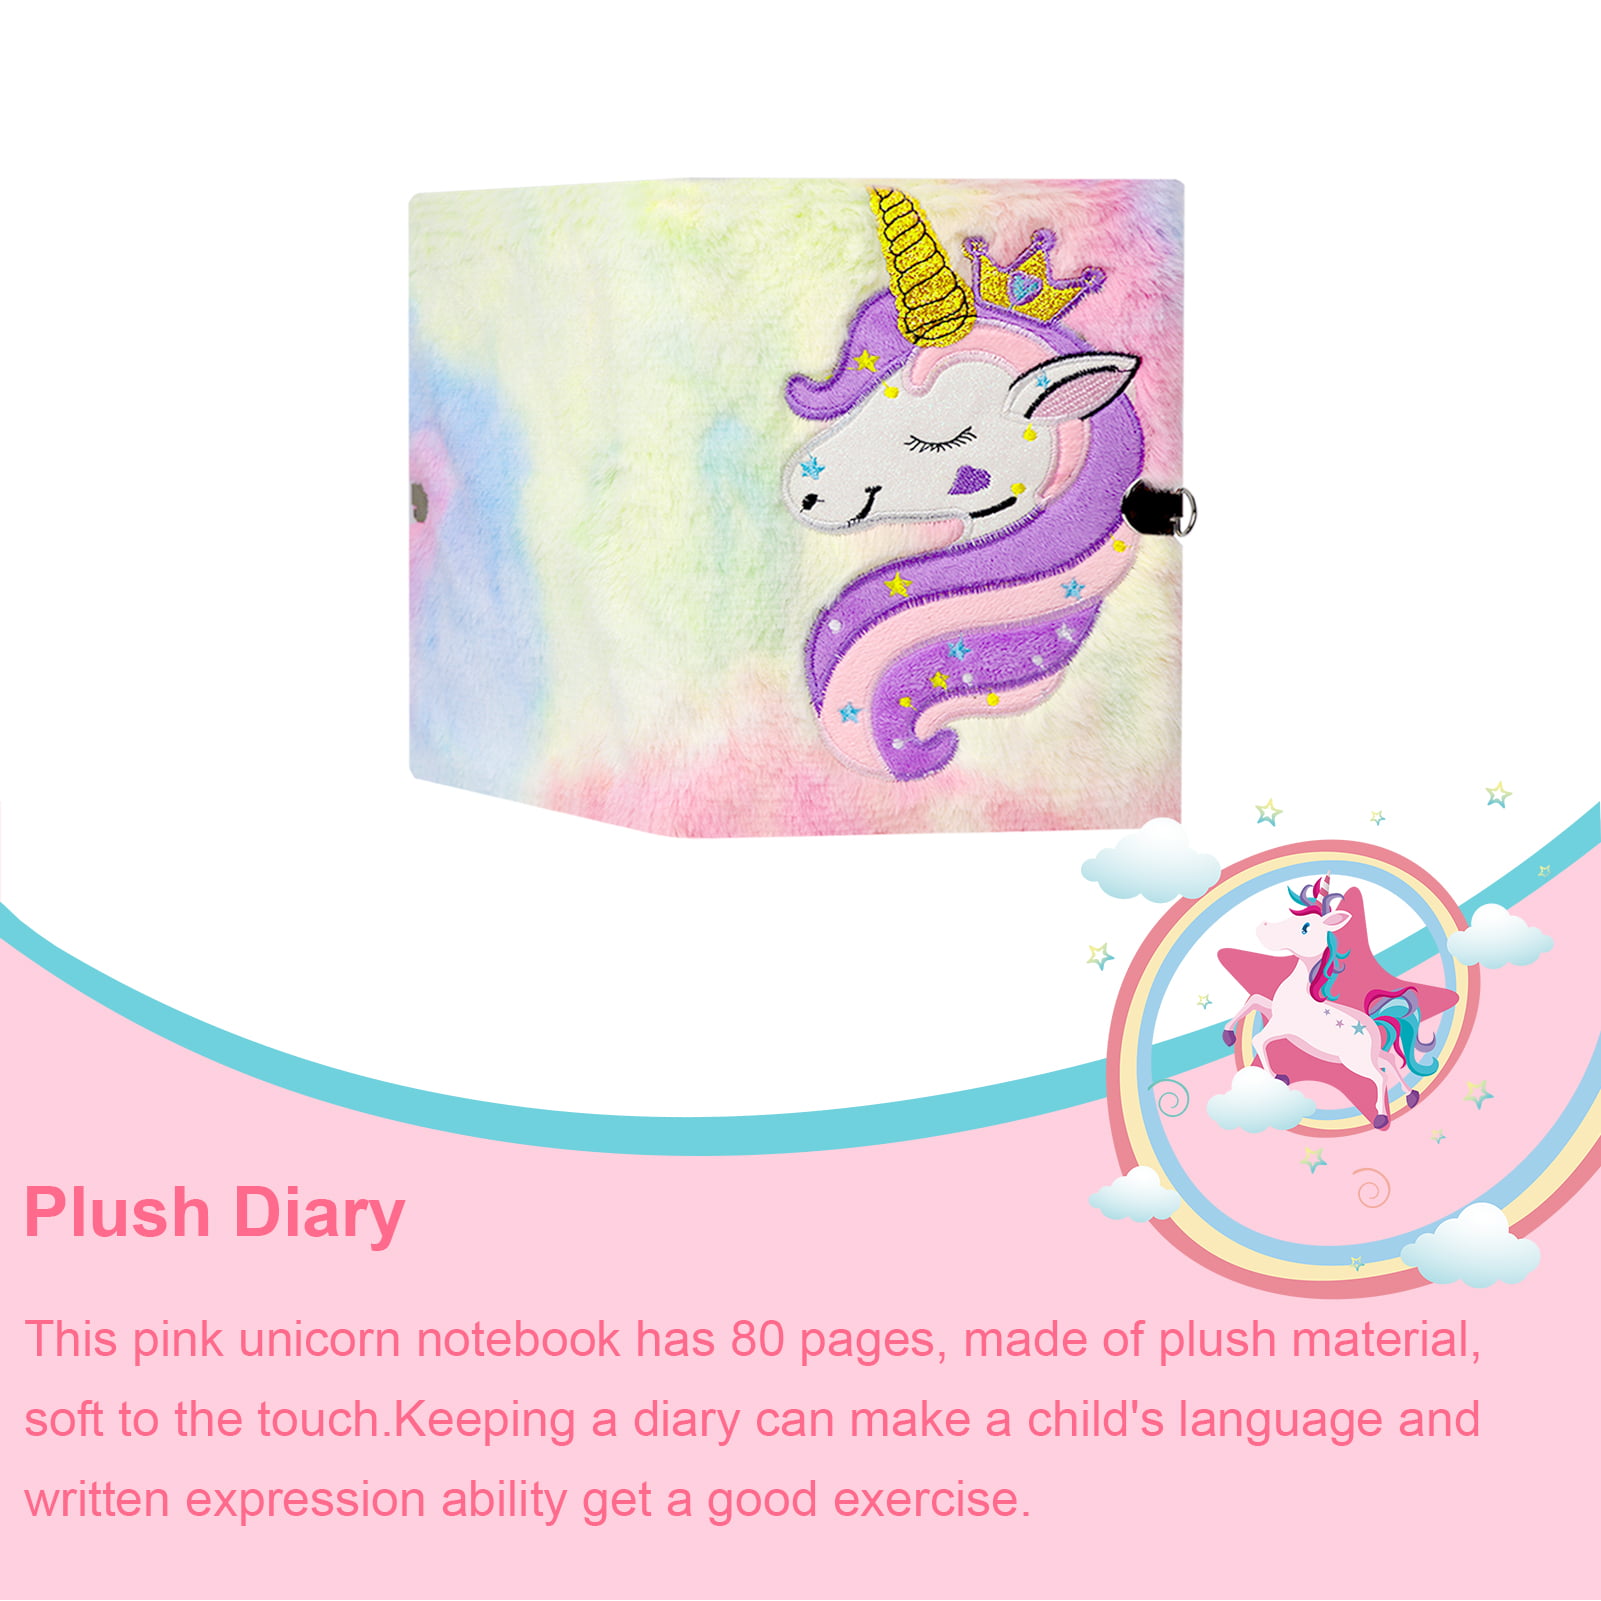 Jspupifip Unicorn Girls Journal with Lock, Unicorn Notebook Journal Gift  Includes PU Leather Notebook 80 Pages, Combination Lock, Ballpoint Pen